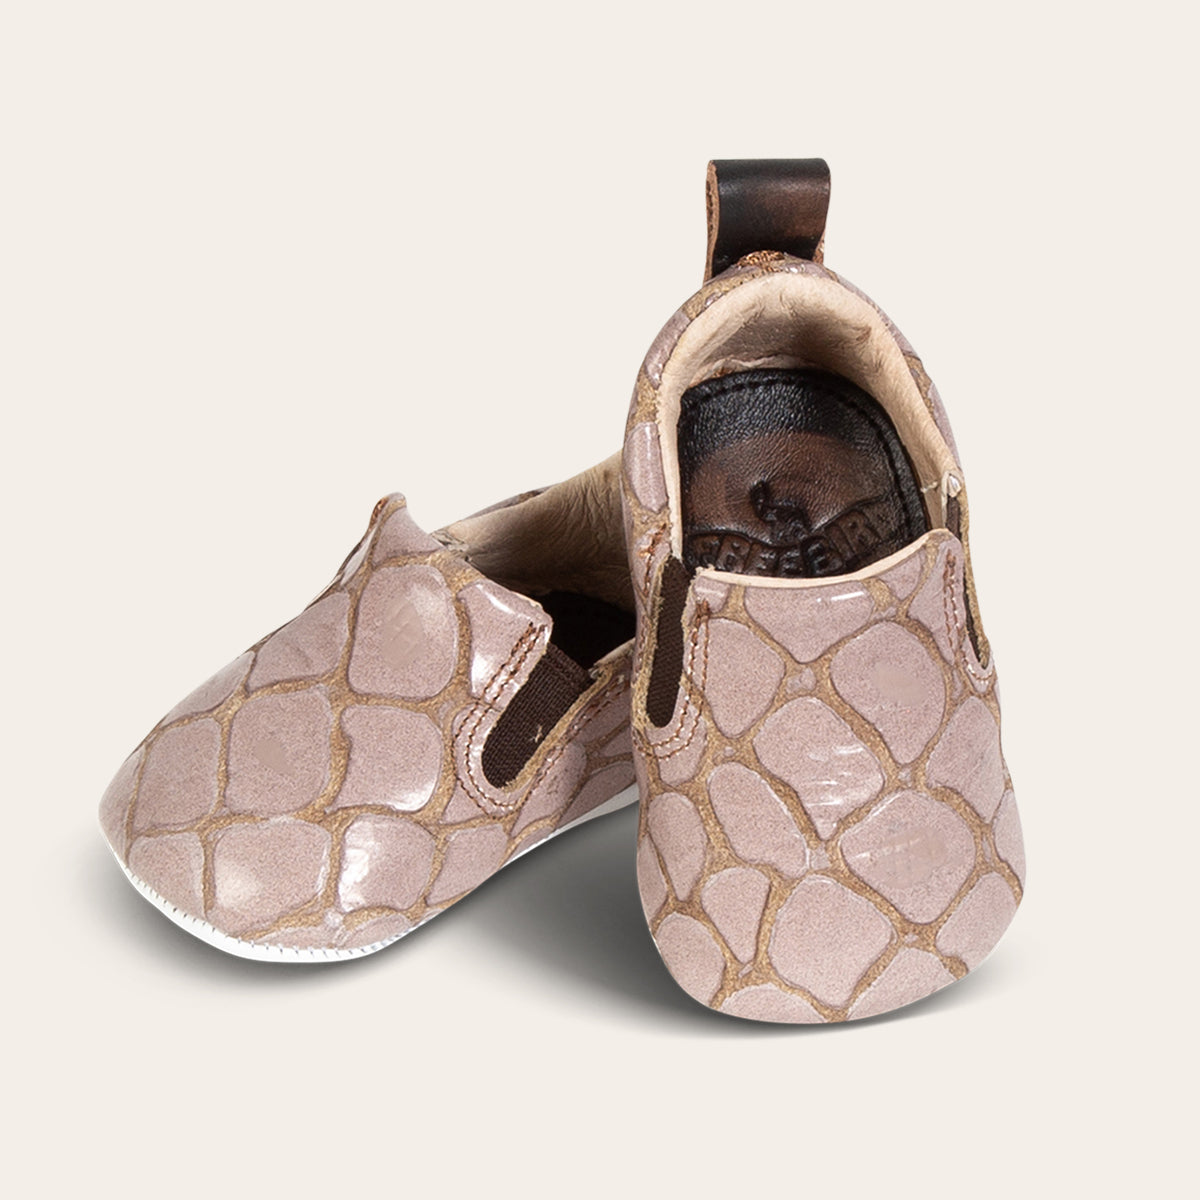 front view showing heel pull tab and side elastic panel on FREEBIRD infant baby kicks stone croco leather shoe